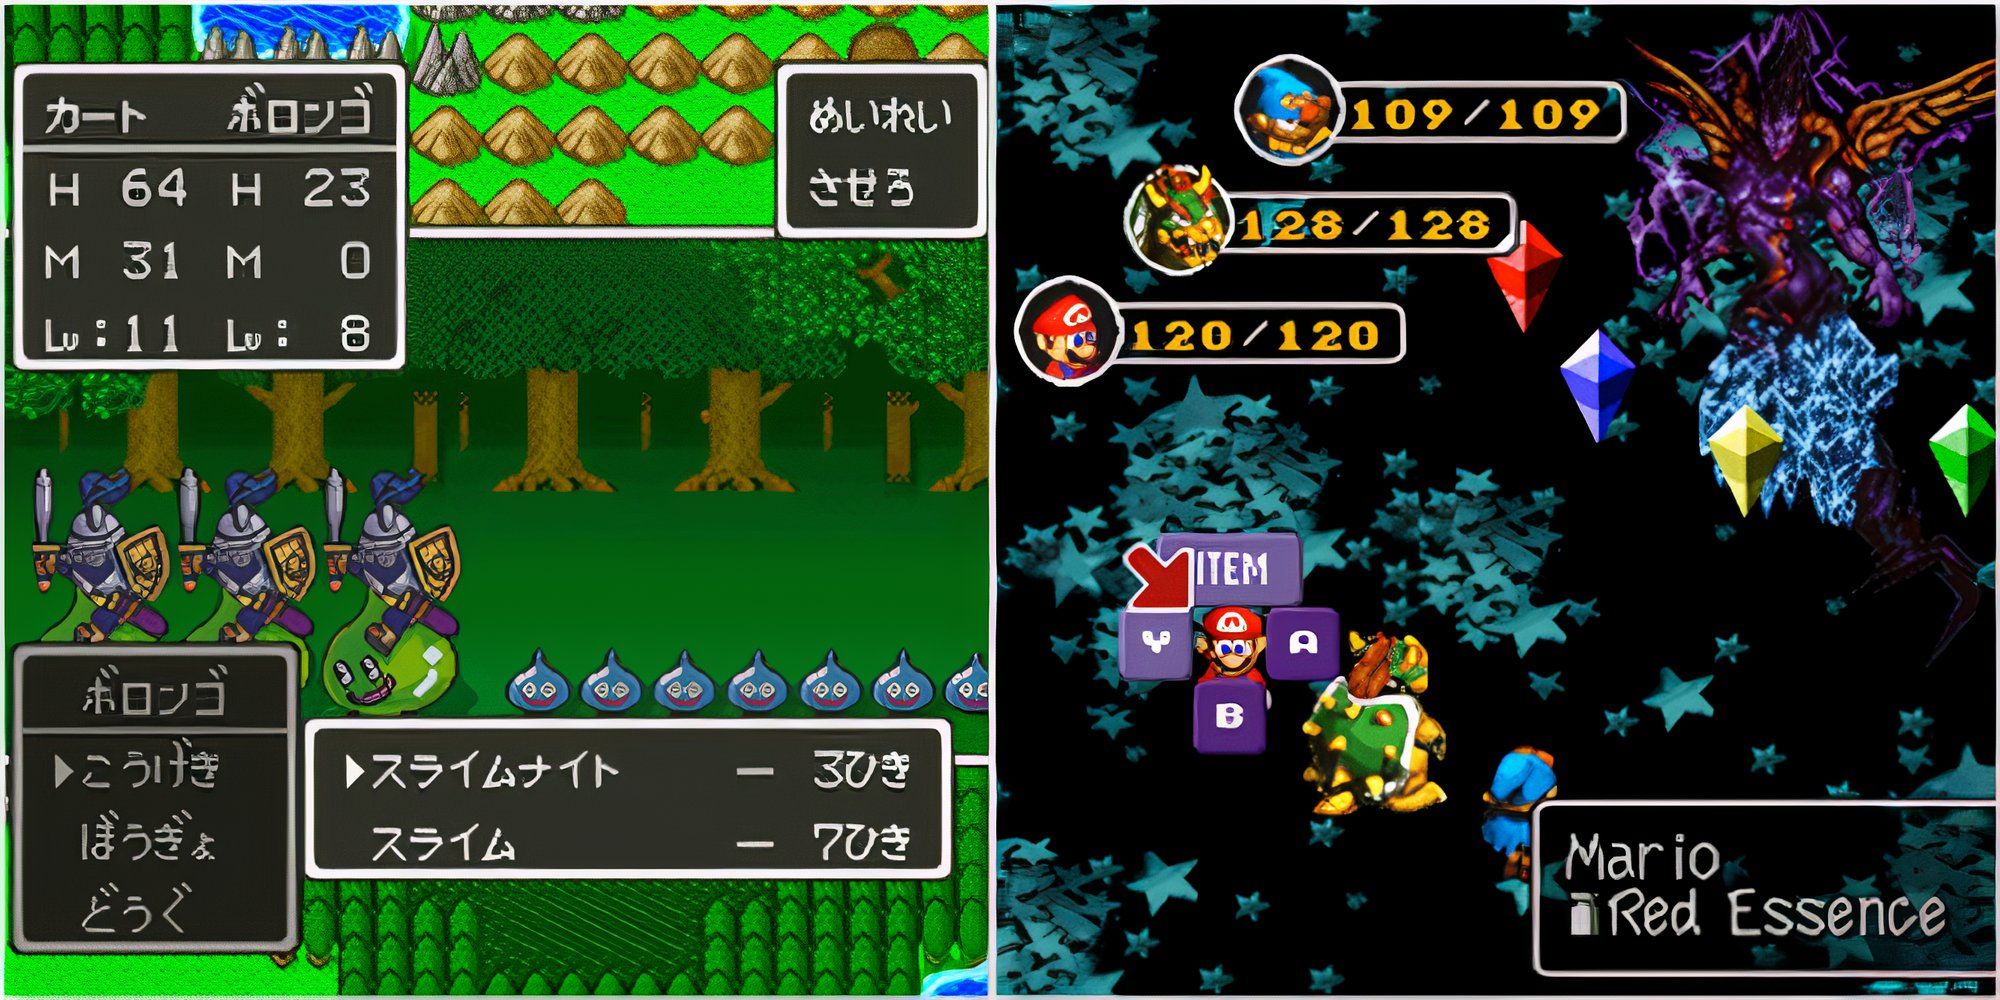 Fighting a battle in Dragon Quest 5 Hand of the Heavenly Bride and Fighting Culex in Super Mario RPG Legend of the Seven Stars